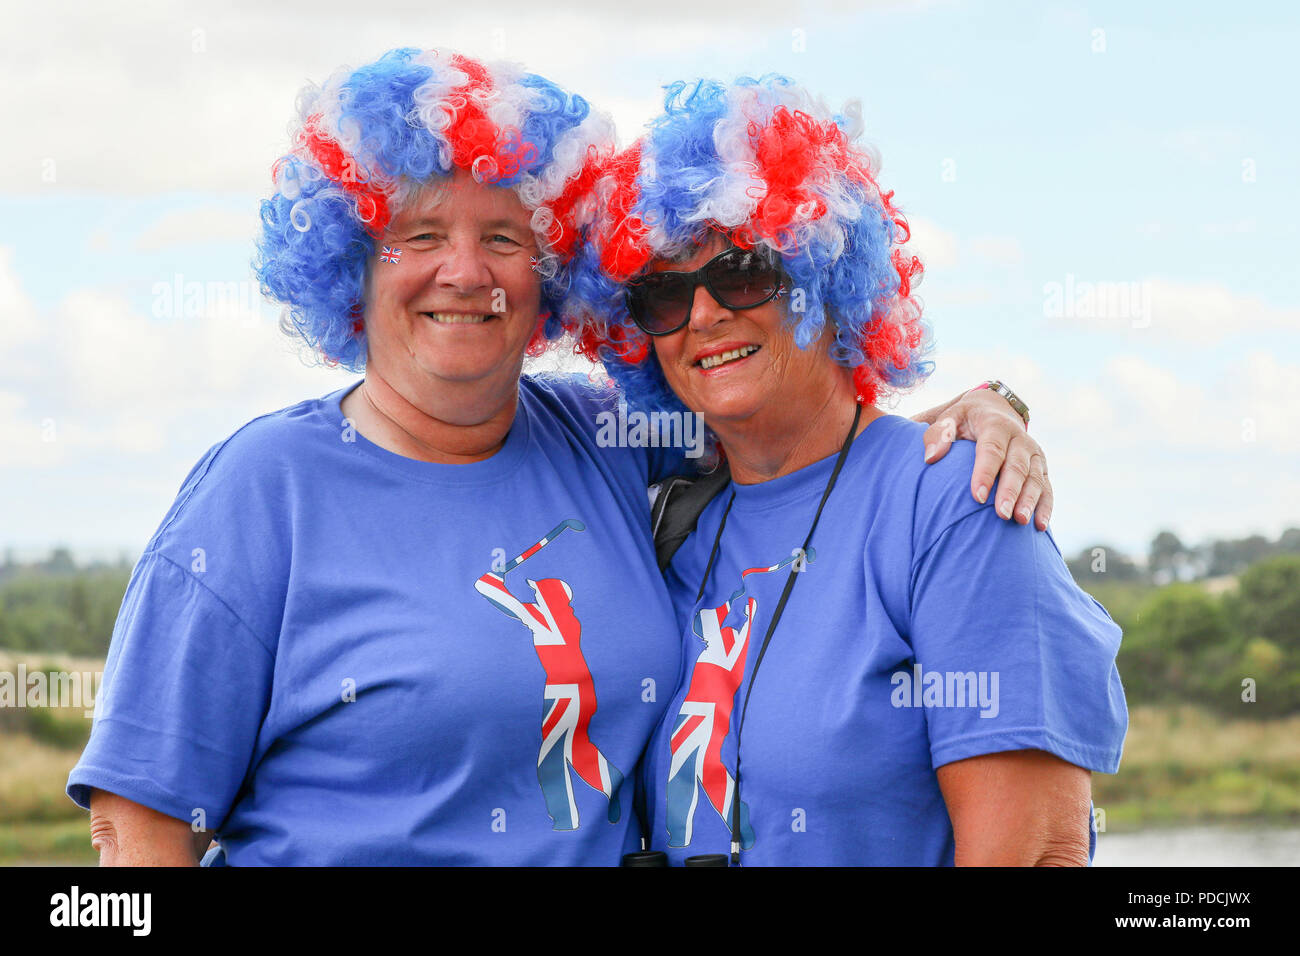 Gleneagles, Scotland, UK. 9th August, 2018. Two friends Janet O'Connor (left) and Sue Cooke (right) travelled from Liverpool to watch and support their favourite golfer Lee Slatery who was playing with Callum Shnkwin in Great Britain 1 at the European Championships 4 ball match play. Both women are wearing blue jerseys because they are Everton supporters Credit: Findlay/Alamy Live News Stock Photo